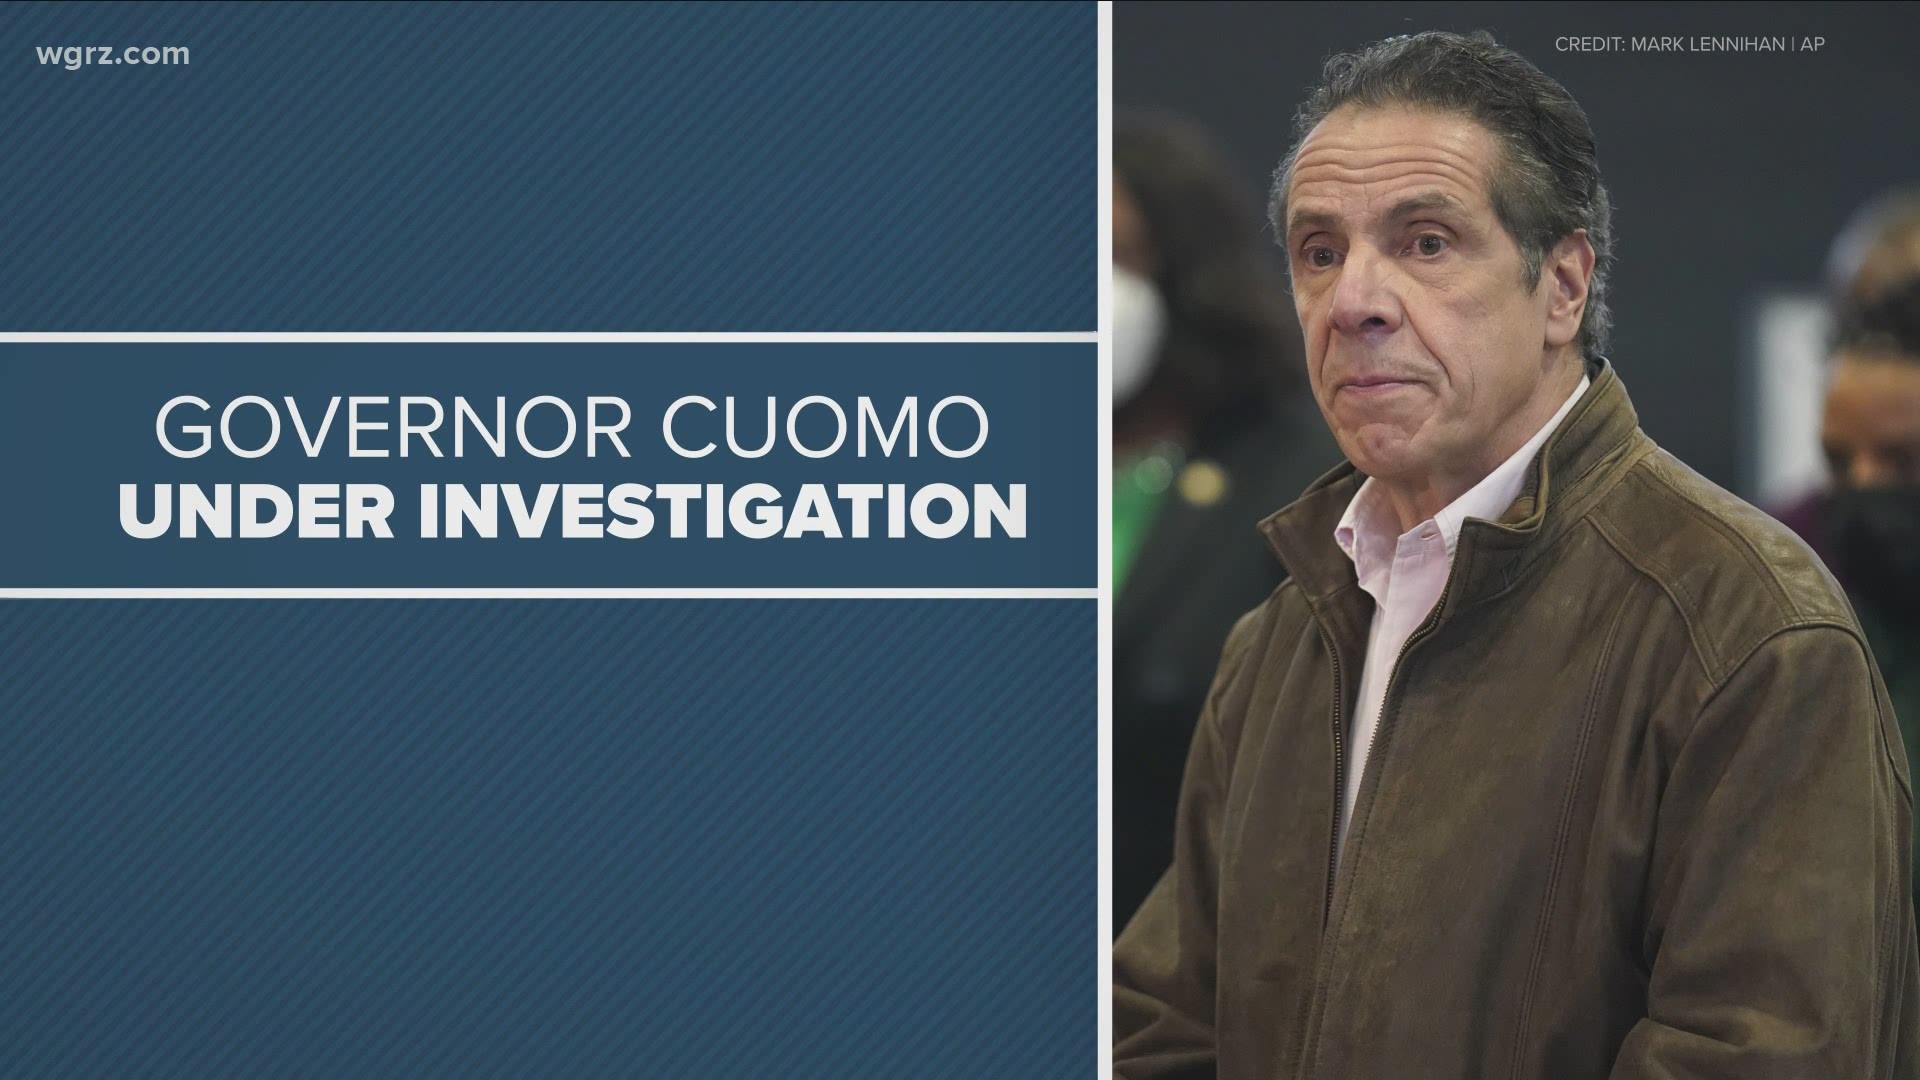 We got an update today on the impeachment investigation into Governor Cuomo as the assembly judiciary committee that's overseeing the probe met to talk about it.